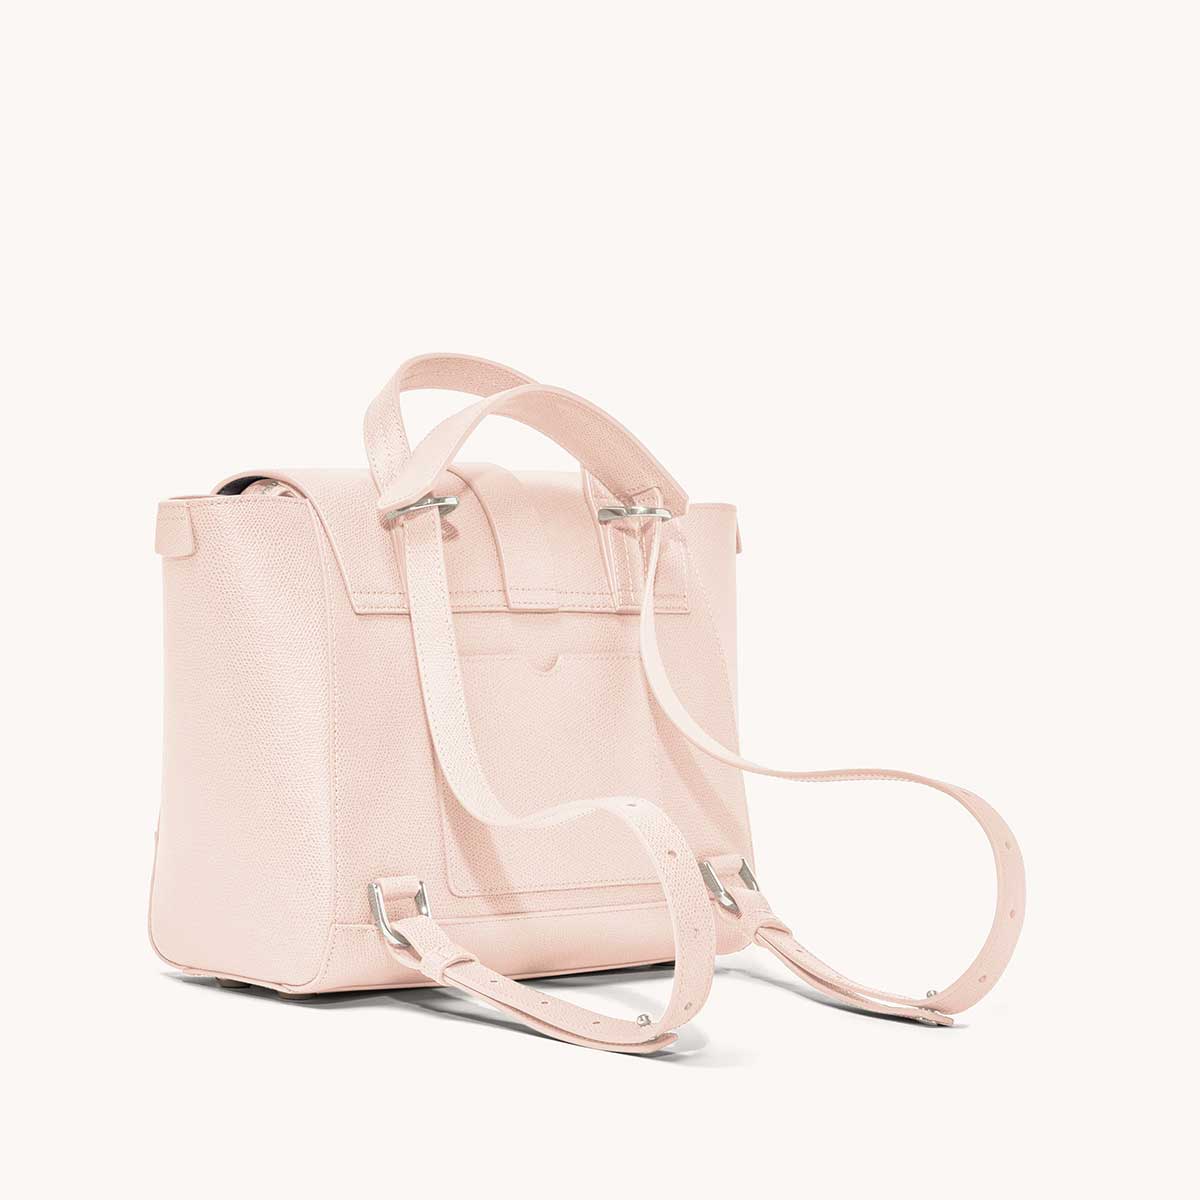 Midi Maestra Bag Pebbled Blush with Silver Hardware Back View